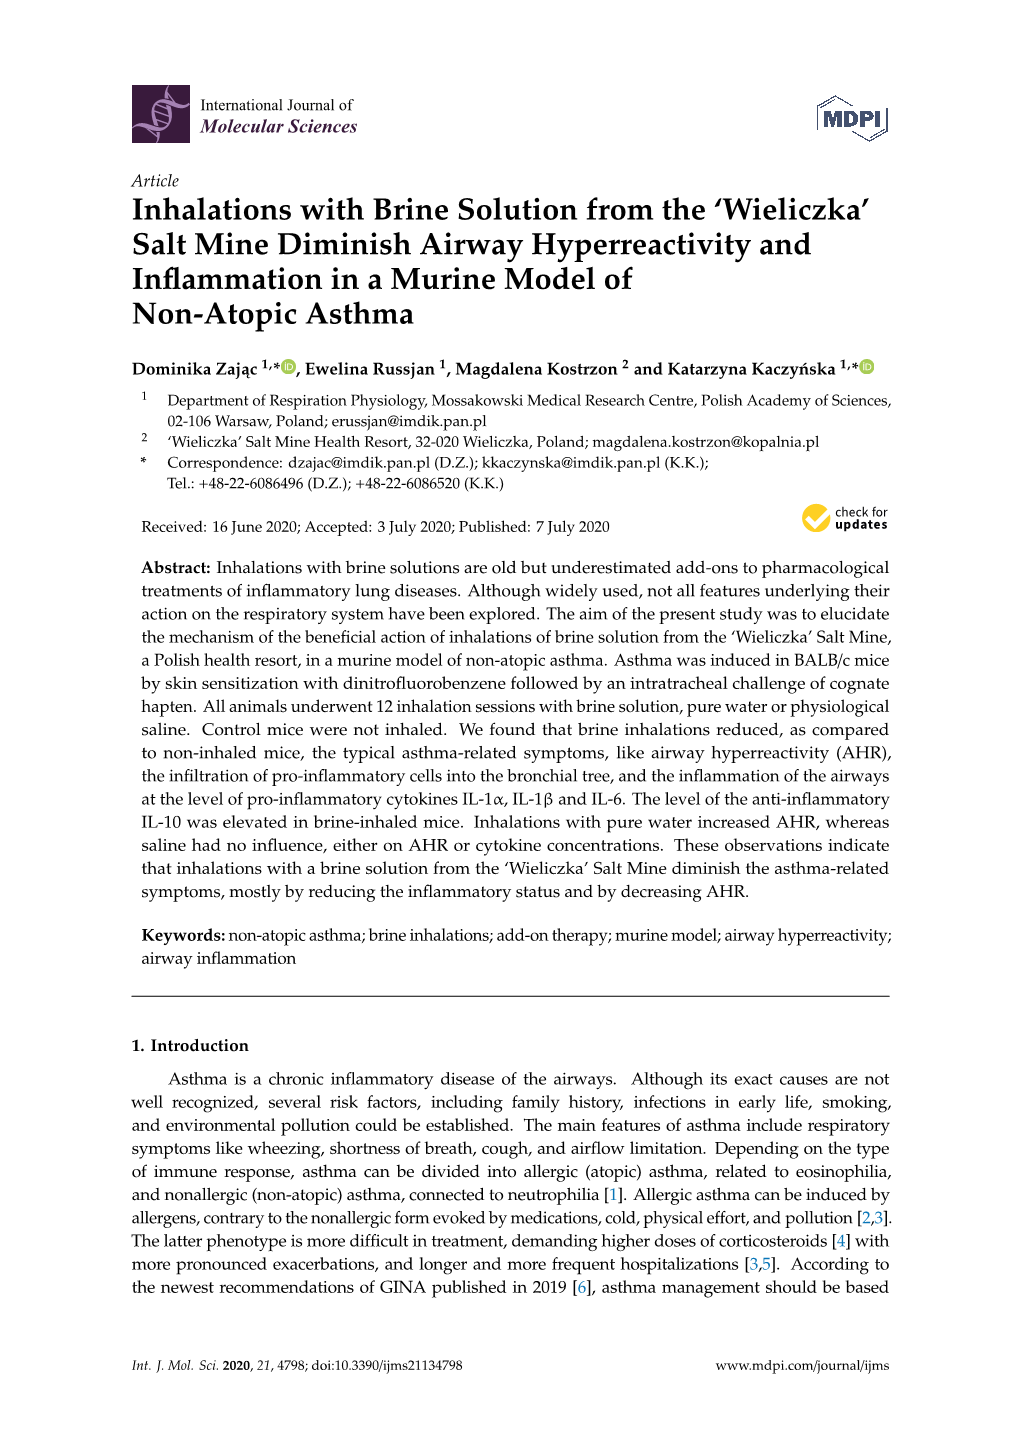 Inhalations with Brine Solution from the ‘Wieliczka’ Salt Mine Diminish Airway Hyperreactivity and Inﬂammation in a Murine Model of Non-Atopic Asthma